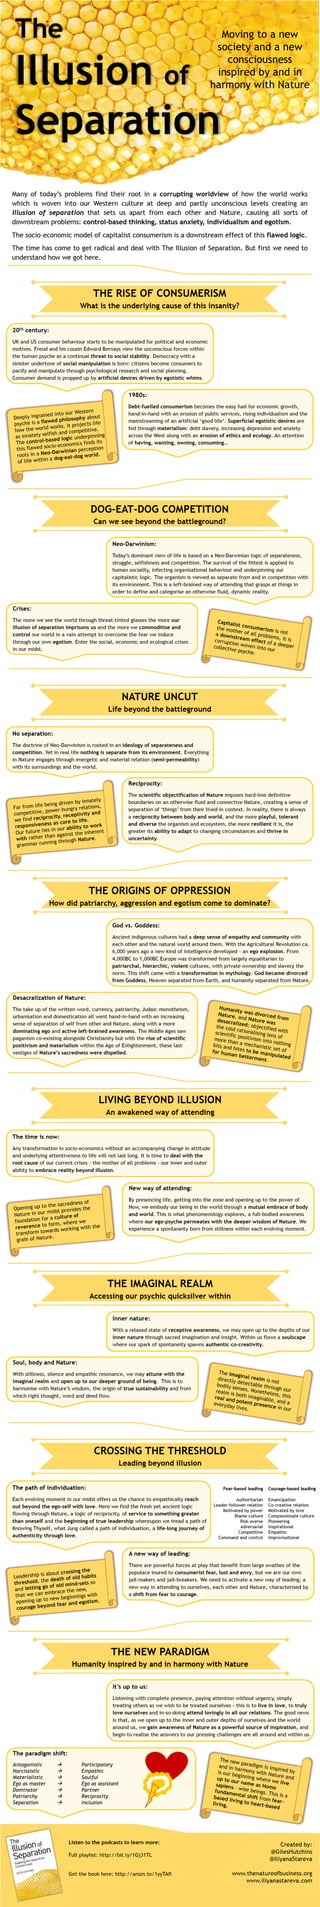 The Illusion of Separation [Infographic]